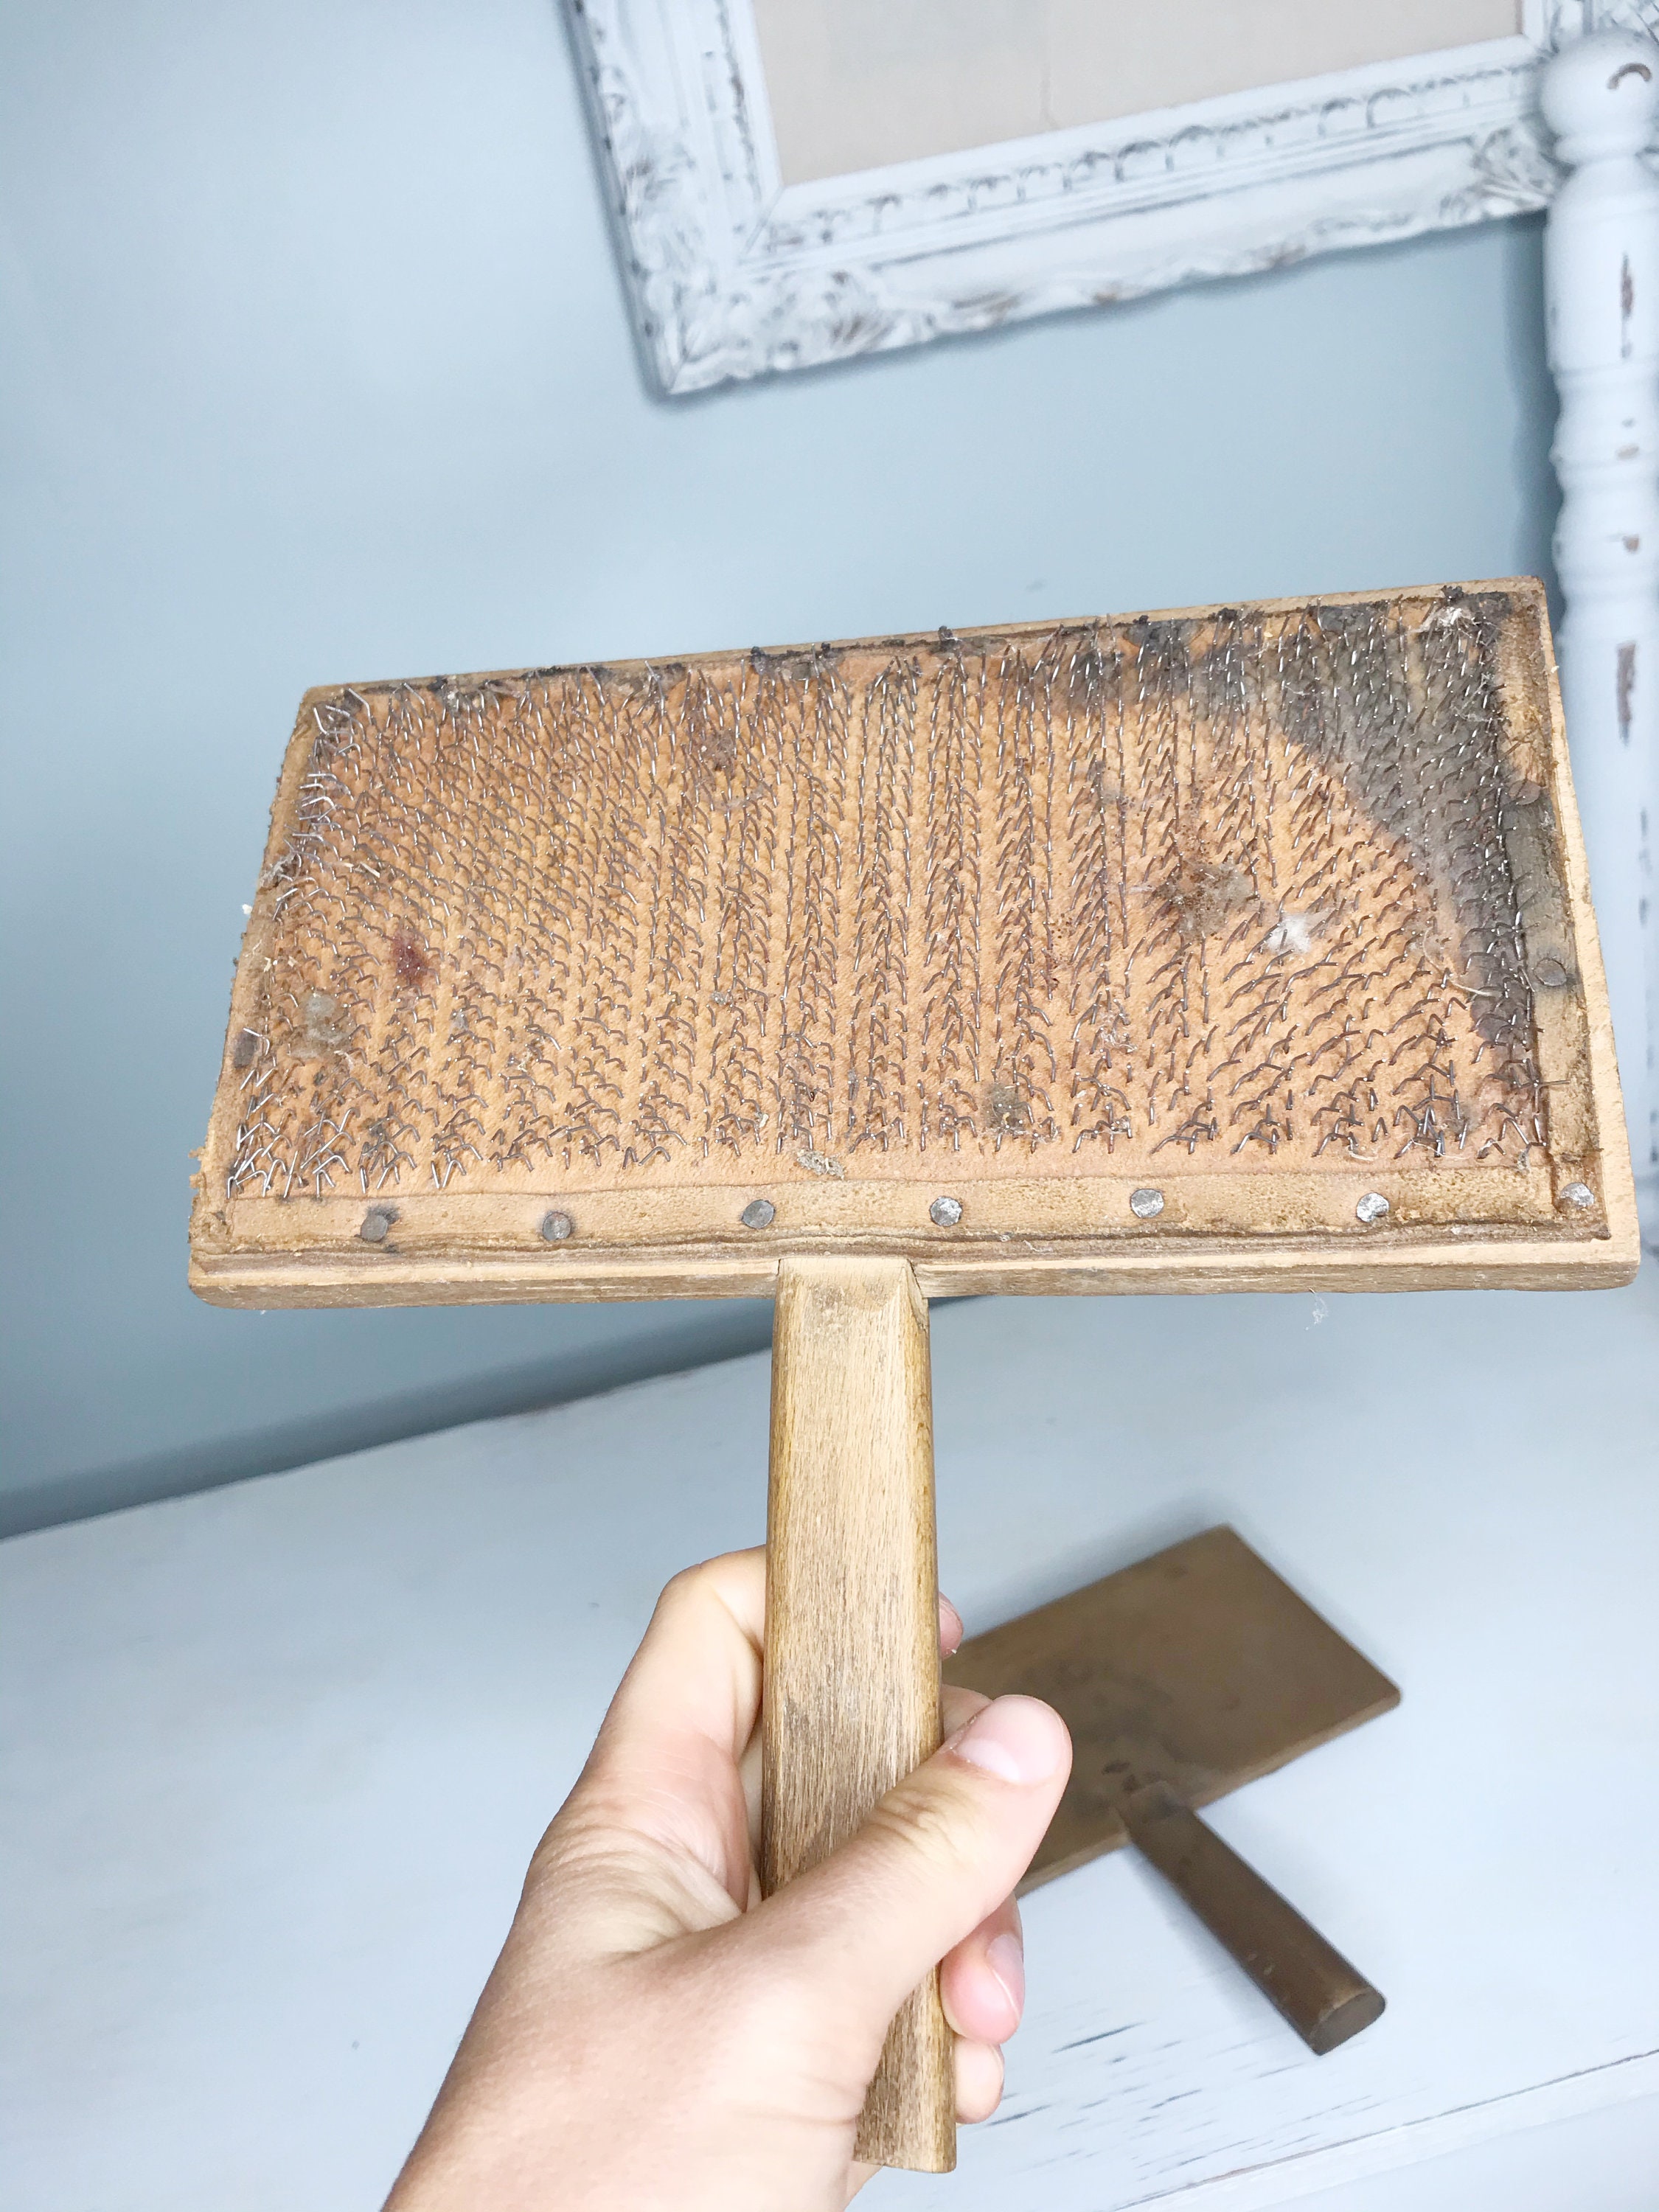 Antique Hand Wool Carding Comb Primitive Wooden Carding Brush Rustic Brush  Tool Wooden Brushing Comb Wool Comb Carder Collecting 